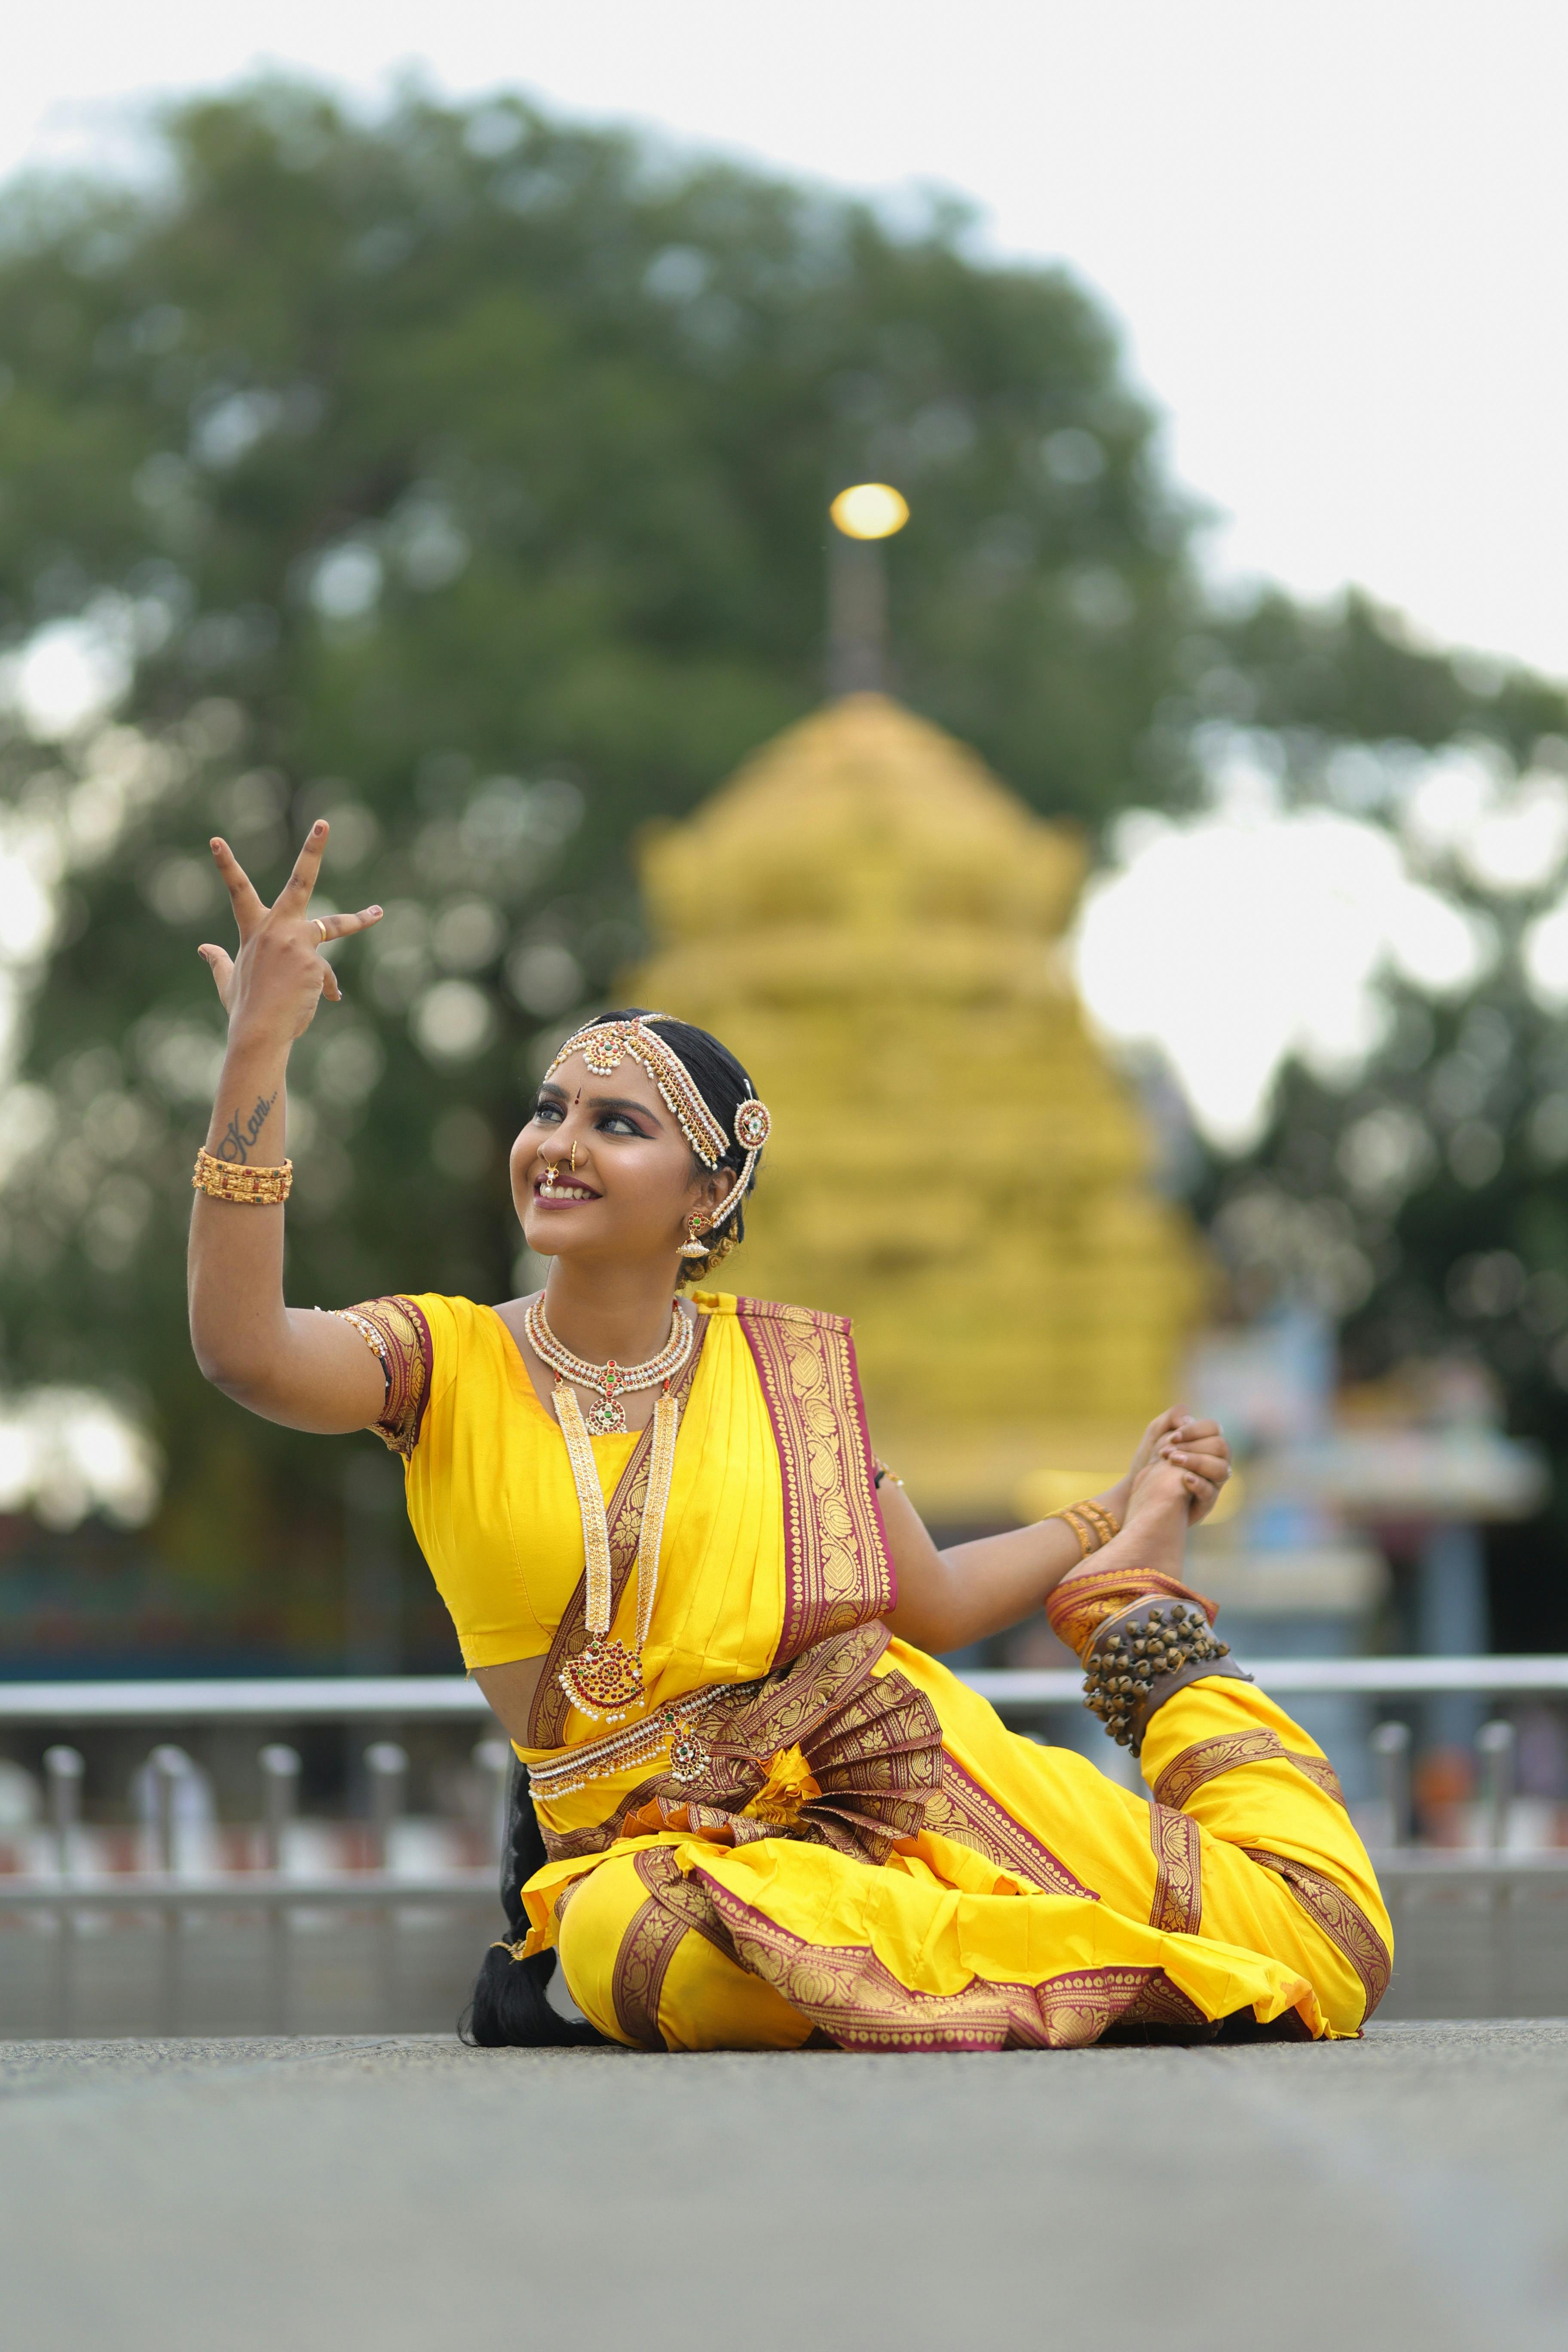 Kalabharathi School of Dance – Committed to promote and present  Bharathanatyam, an ancient South Indian dance form, through instructional  classes and professional performances.